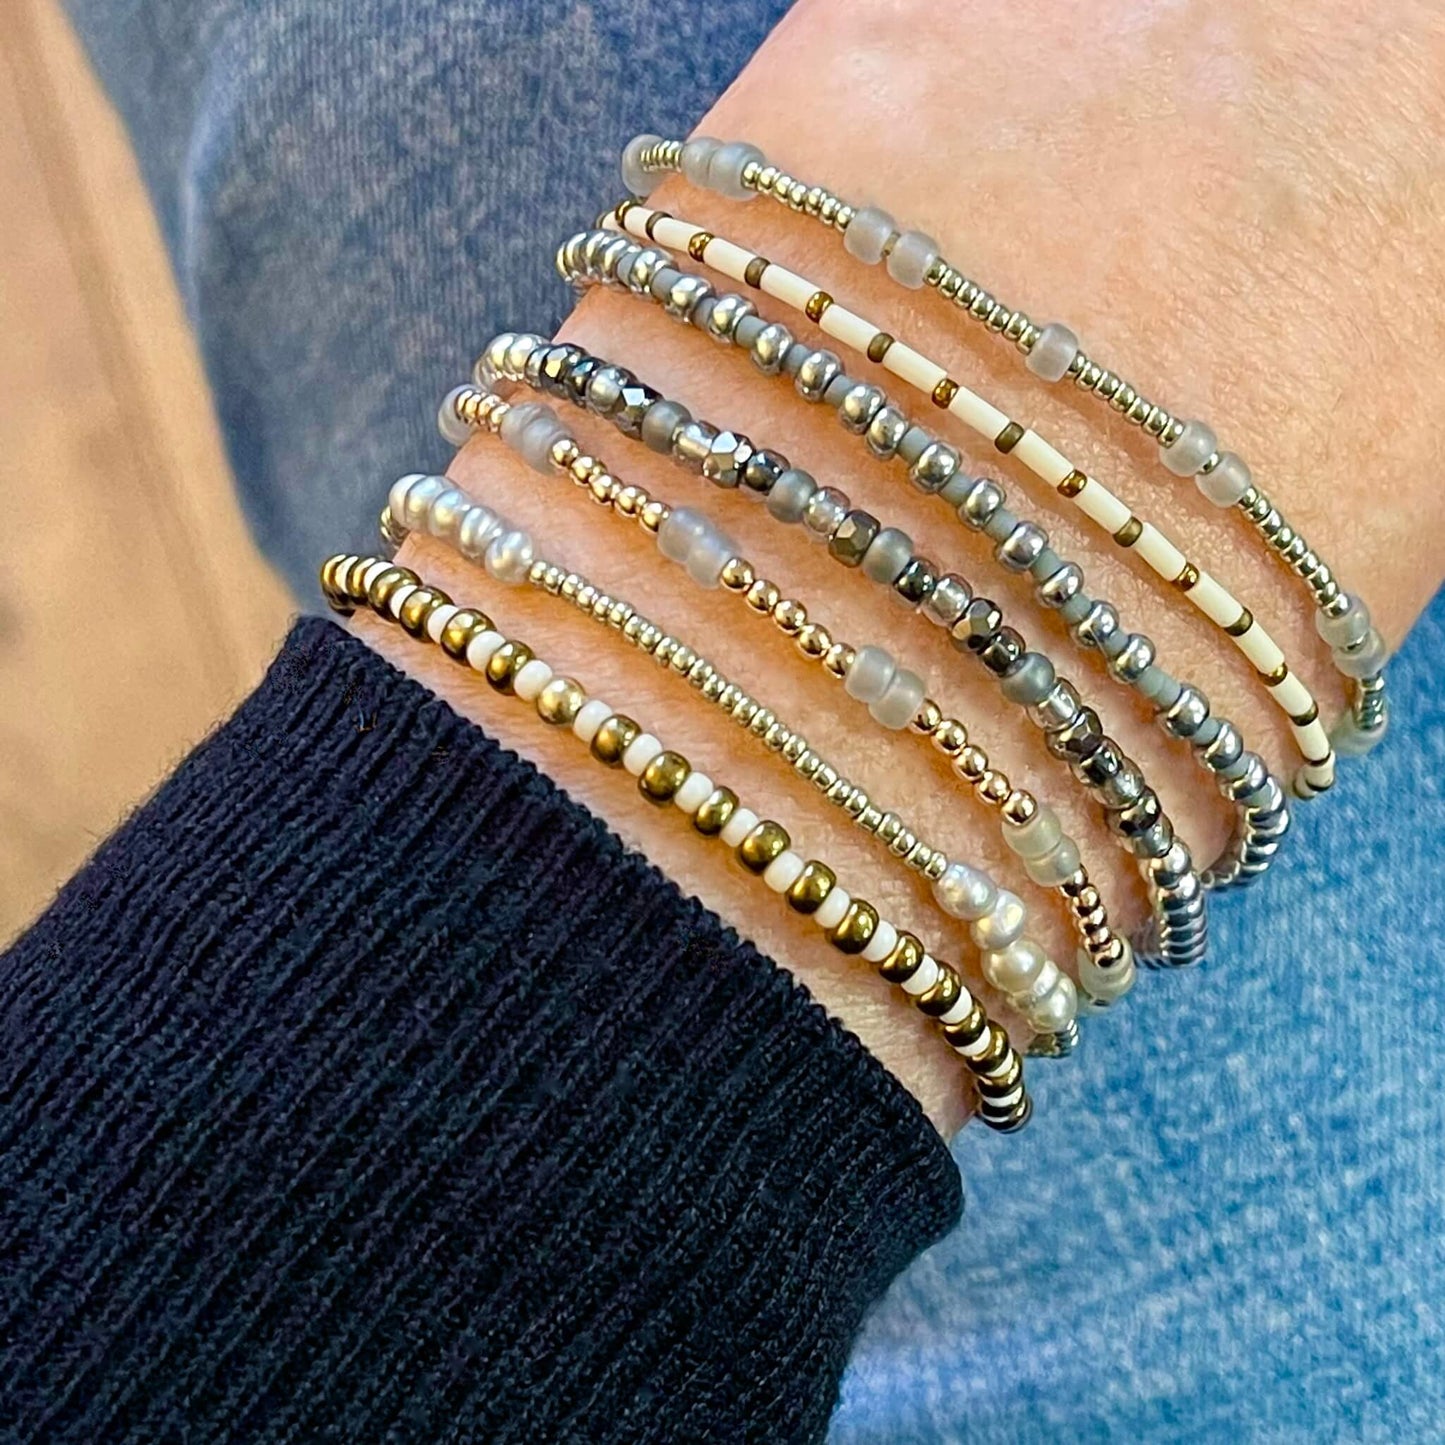 Mixed Metal Seed Beed Stretch Bracelets, Gold Stretch Bracelets, Freshwater Pearl Bracelets. Stack of 7 in Neutral Colors.